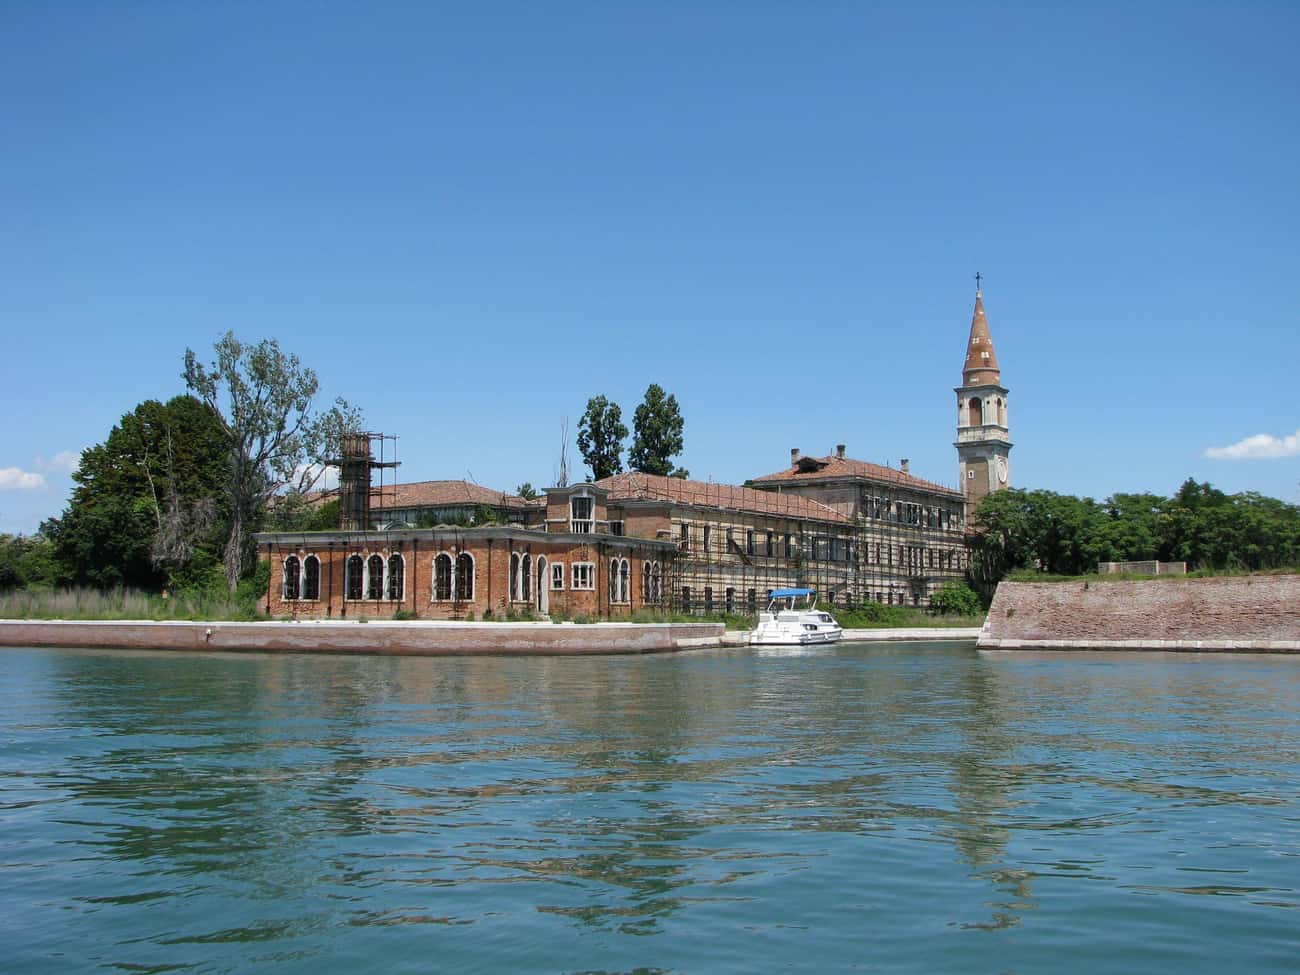 A Psychiatric Hospital Was Built On Poveglia, Resulting In Even More Tortured Souls